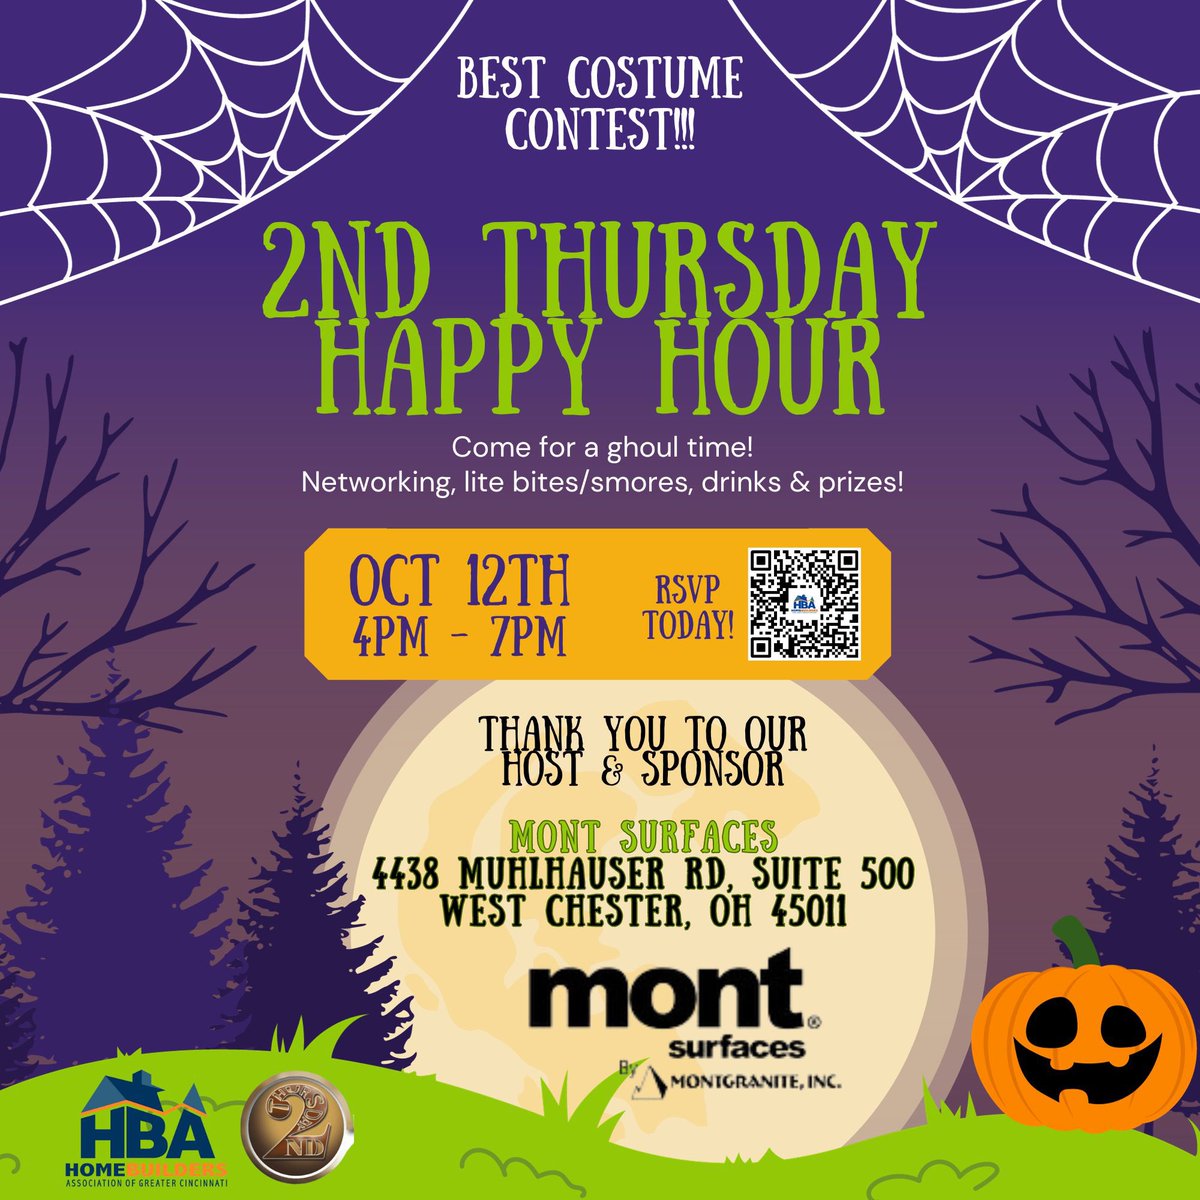 Meet us at Mont Surfaces for 2nd Thursday Happy Hour! 👻🎃 There will be complimentary lite bites 🥨, smores 🍫, and drinks 🍻, plus a 1st🥇 and 2nd🥈place prize for the best costumes 🦹🏽‍♀️🦸🏼‍♂️🦸🏿🦹🏼👨‍✈️👩🏽‍✈️! RSVPs are appreciated❣️❣️ Hope to see you there! 🤗🤗 CincyBuilders.com/events